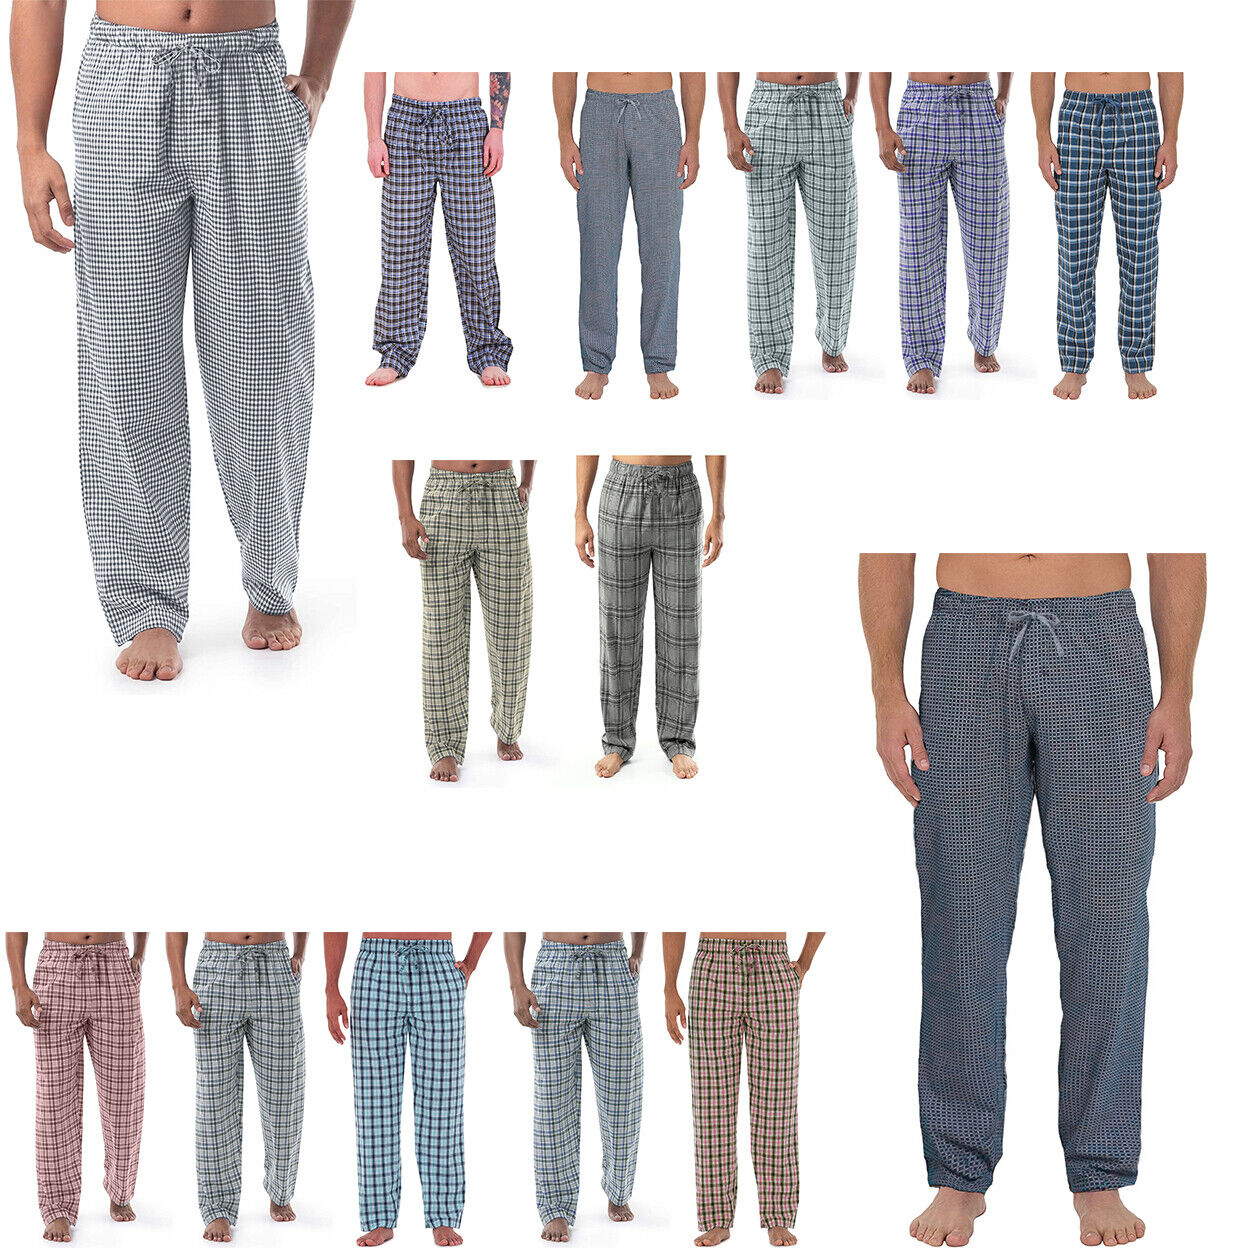 Men's Ultra-Soft Solid & Plaid Cotton Jersey Knit Comfy Sleep Lounge Pajama Pants - Solid, Small